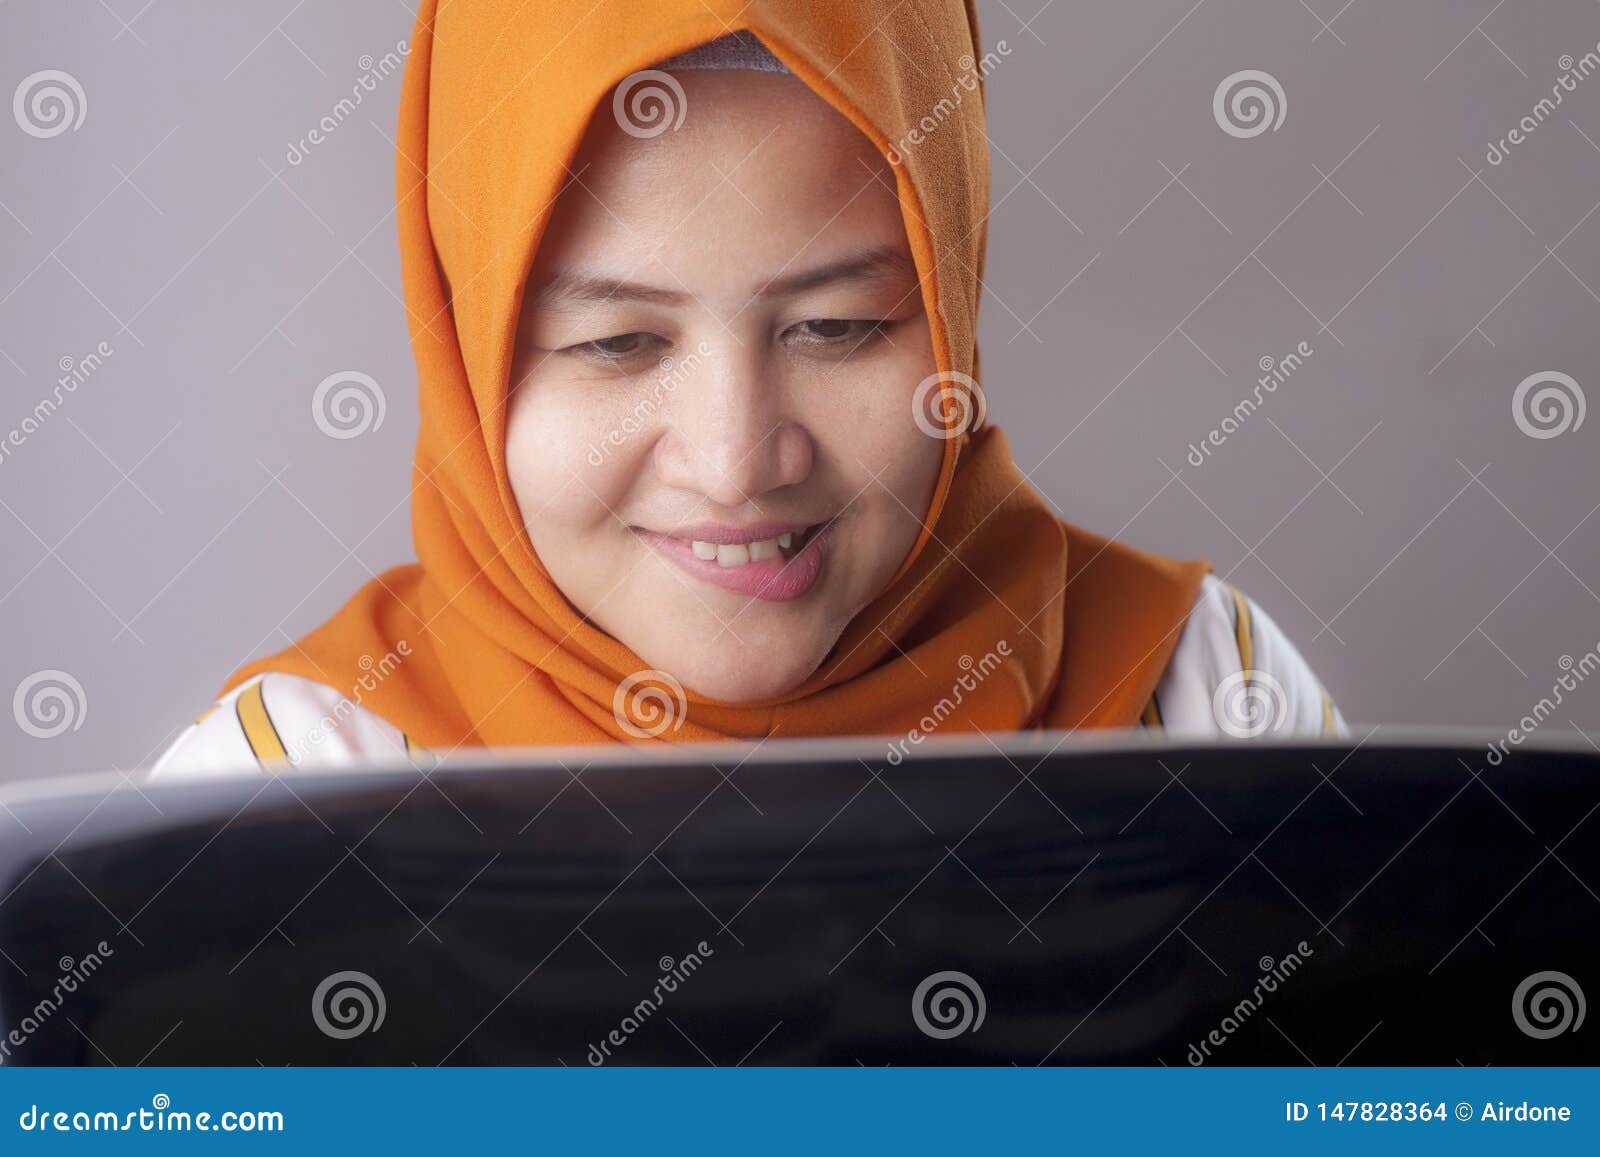 Woman Watching Porn On Computer - Woman With Naughty Expression Looking At Laptop Stock Photo ...